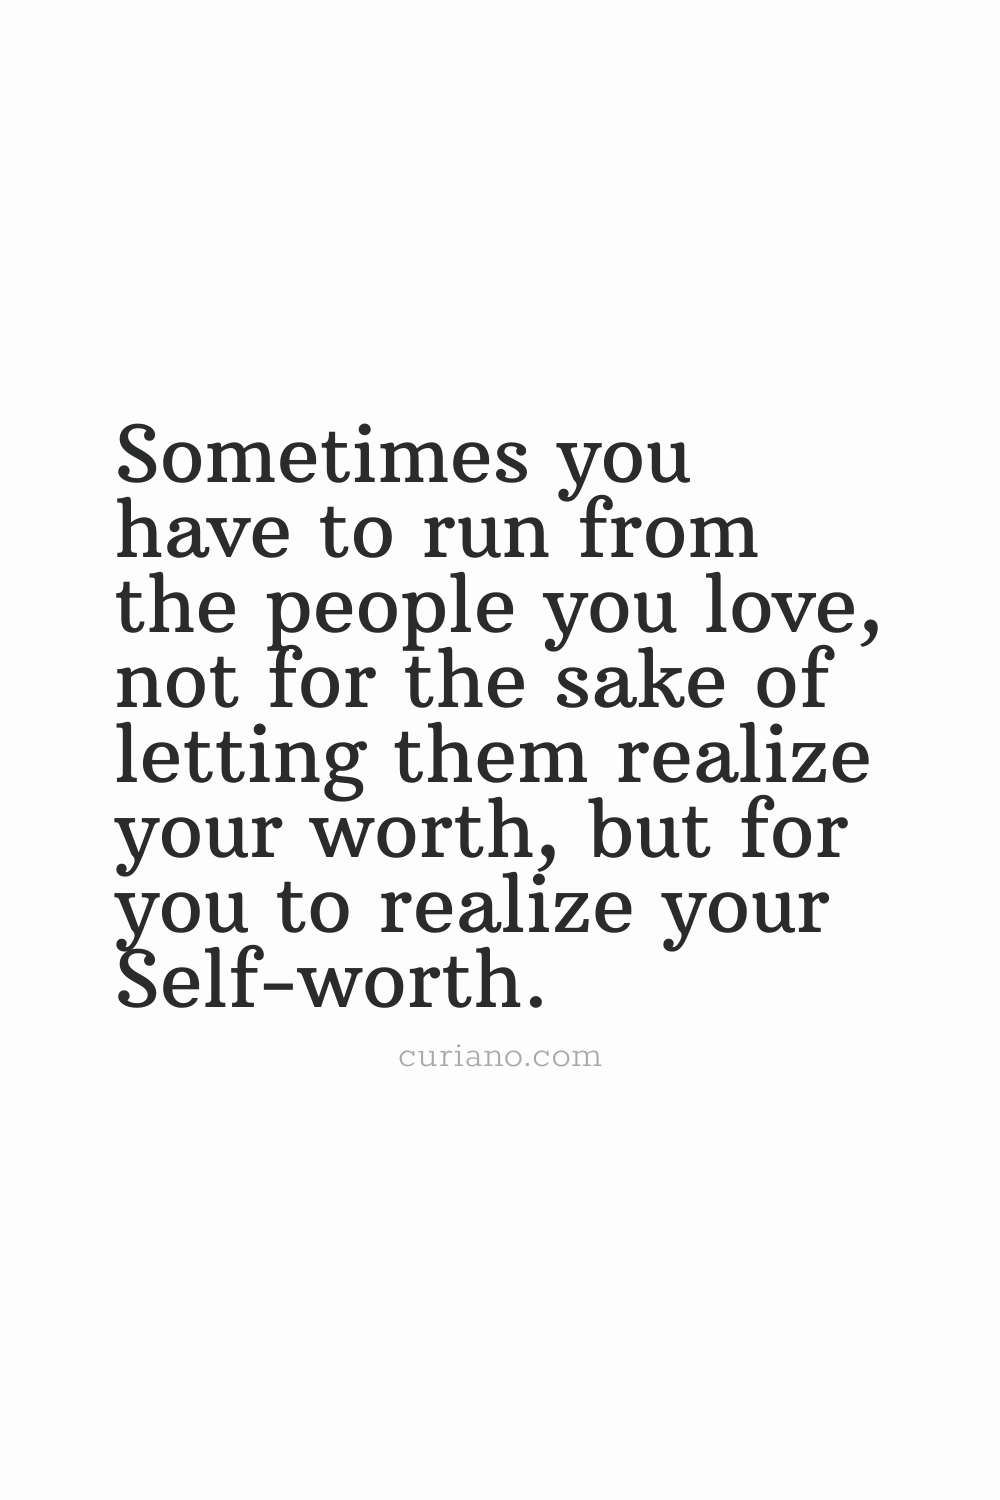 Sometimes you have to run from the people you love, not for the sake of letting them realize your worth, but for you to realize your Self-worth.